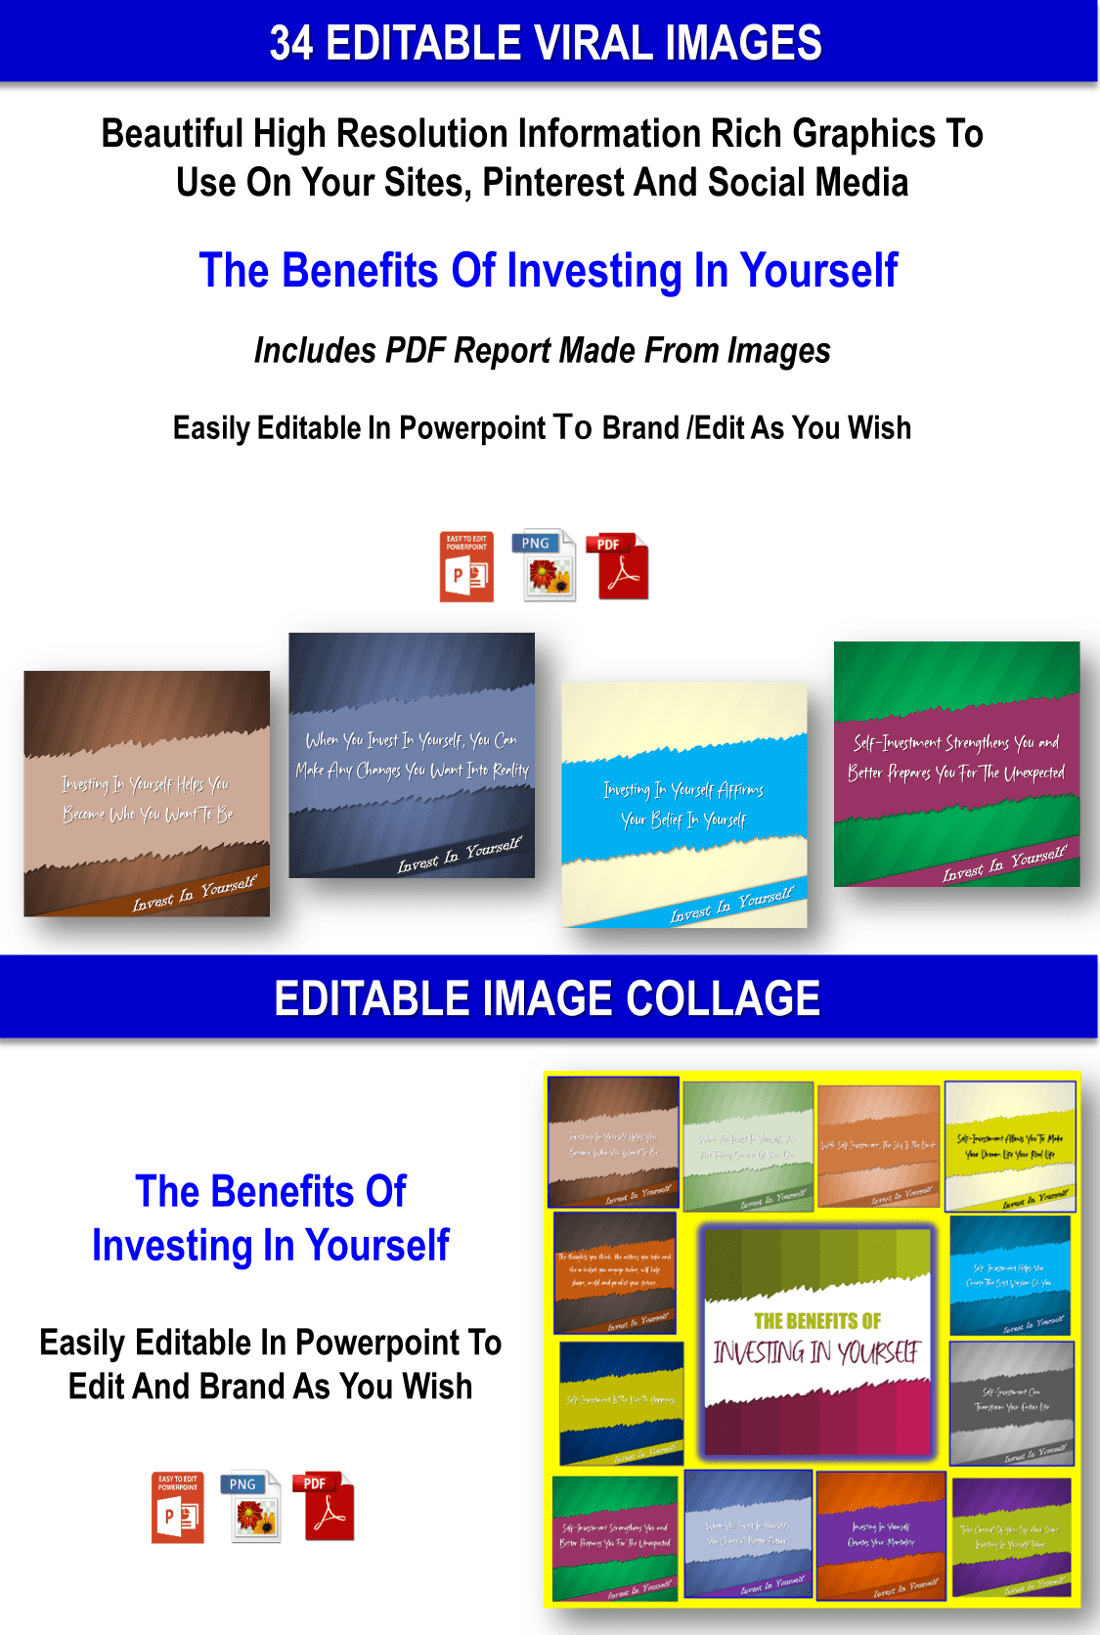 Invest In Yourself Personal Development Content with PLR Rights